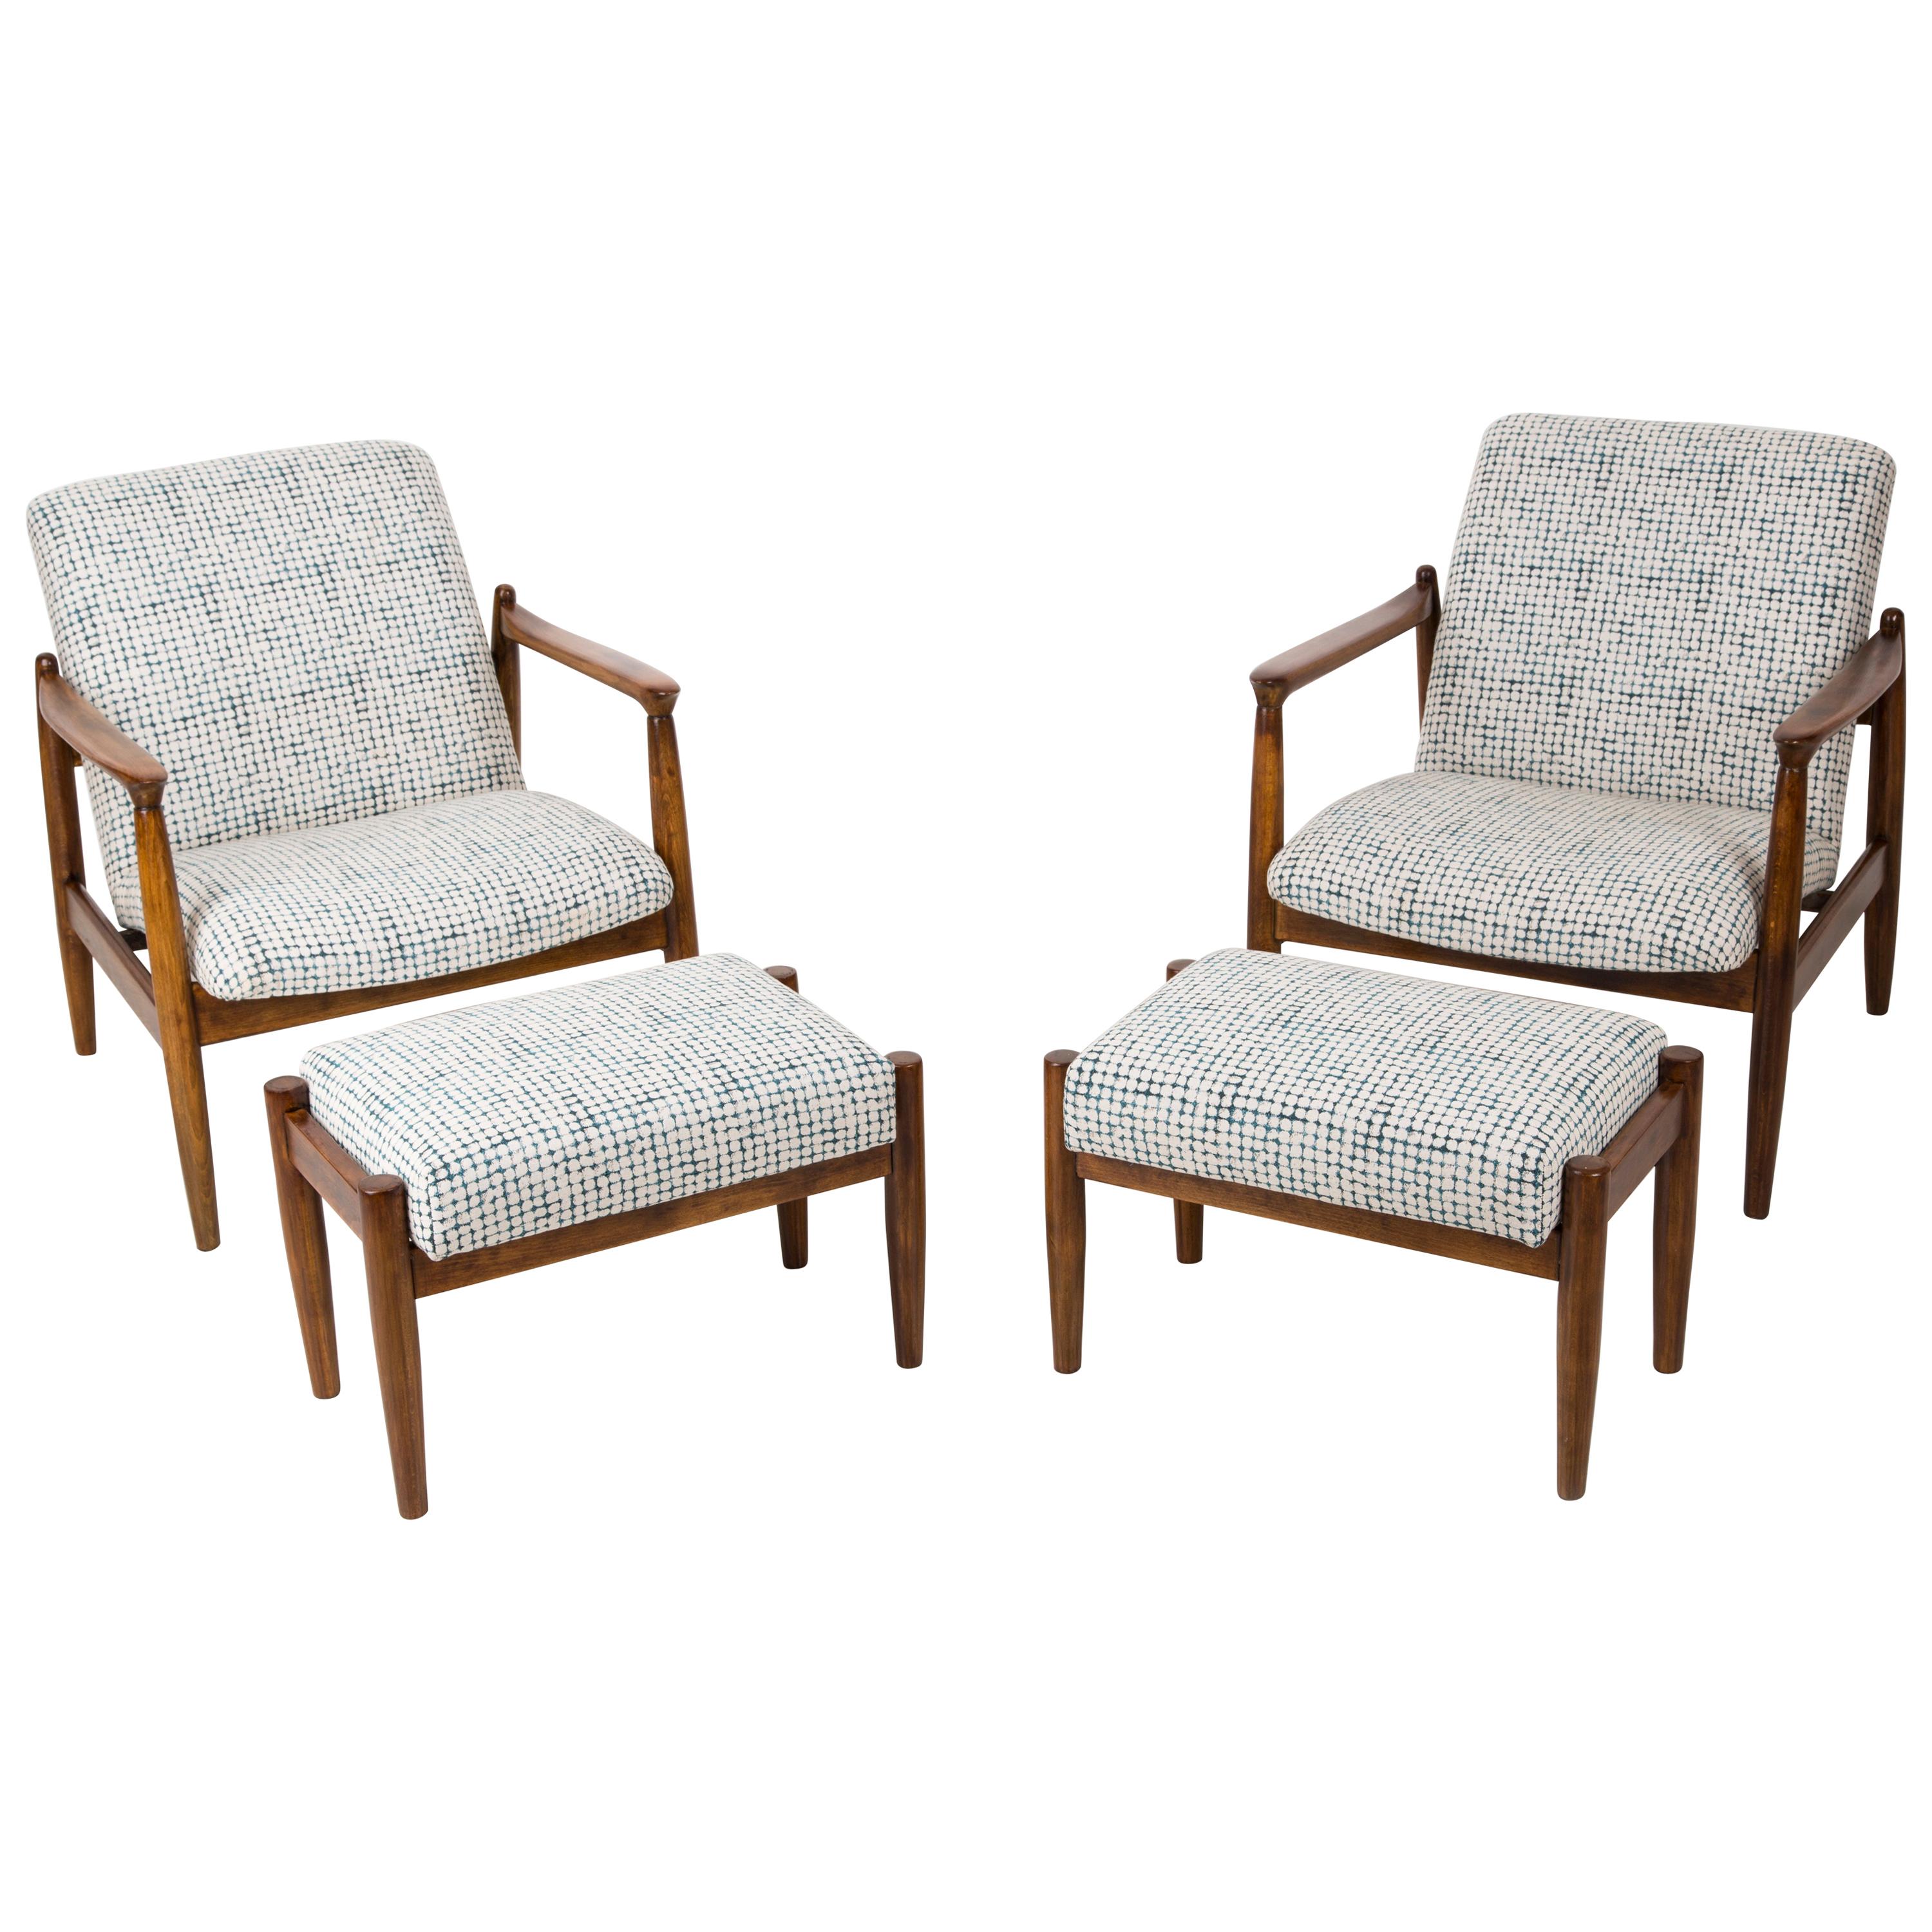 Set of White and Aqua Vintage Armchairs and Stools, Edmund Homa, 1960s For Sale